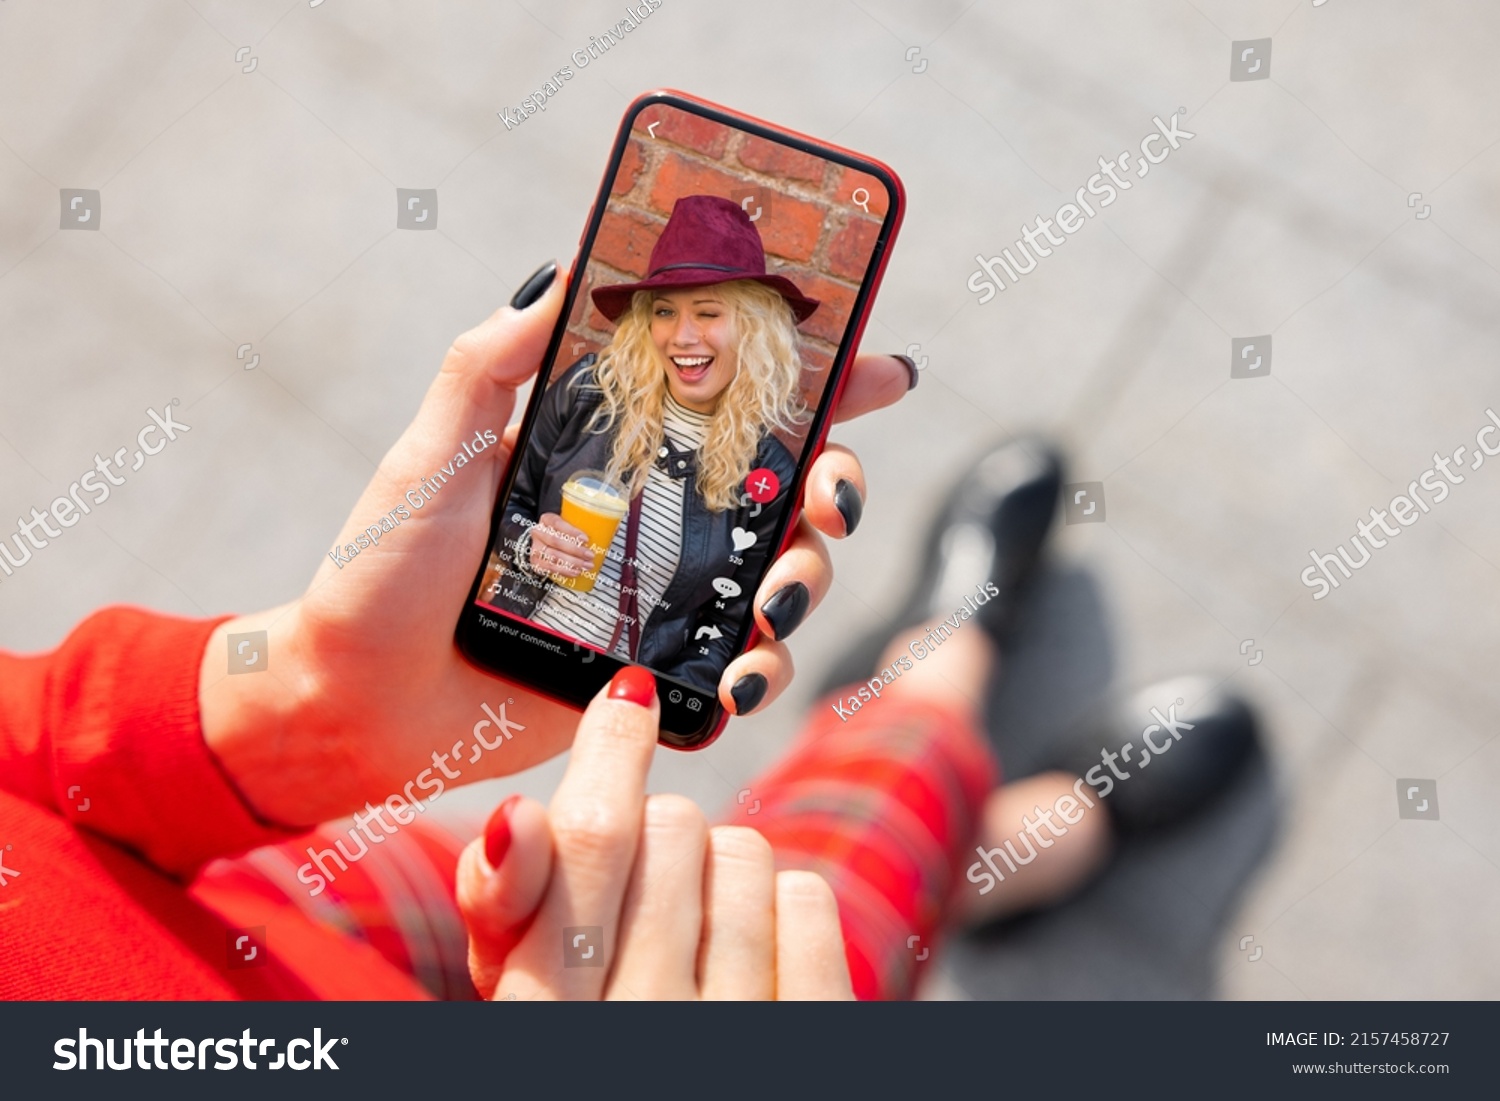 Woman viewing social media content on mobile phone #2157458727